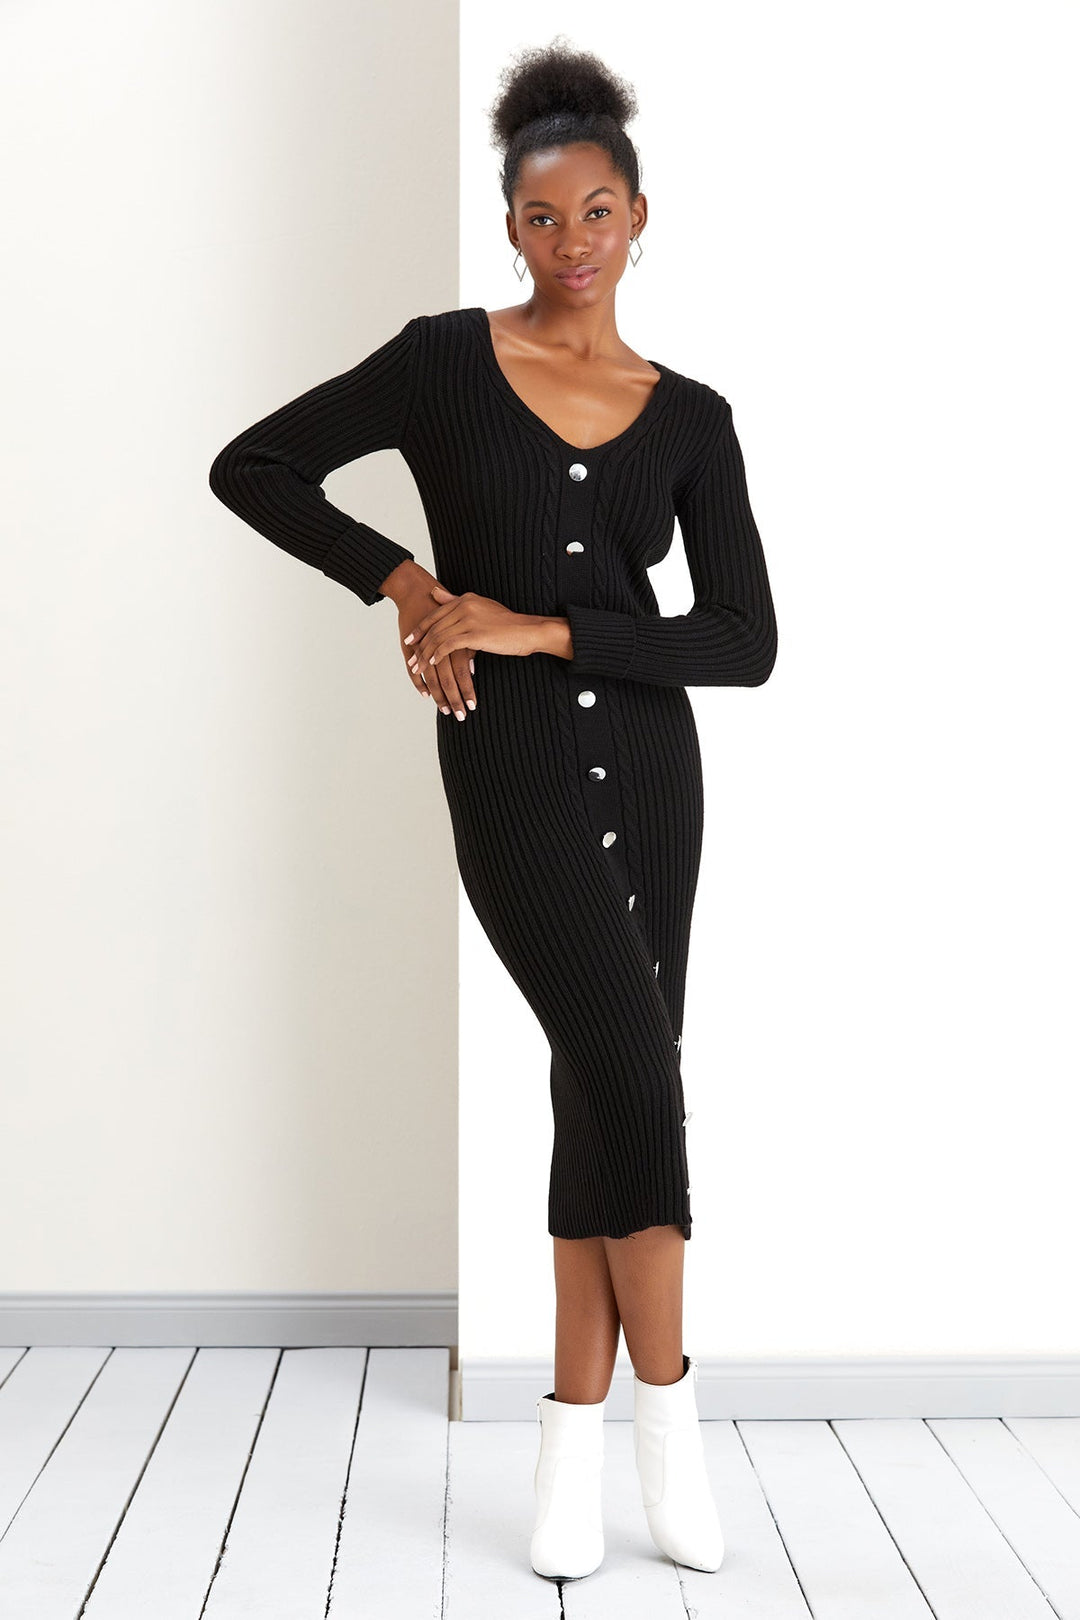 V Neck Knitted Midi Dress with Buttons in Black (PRE-ORDER) - jqwholesale.com